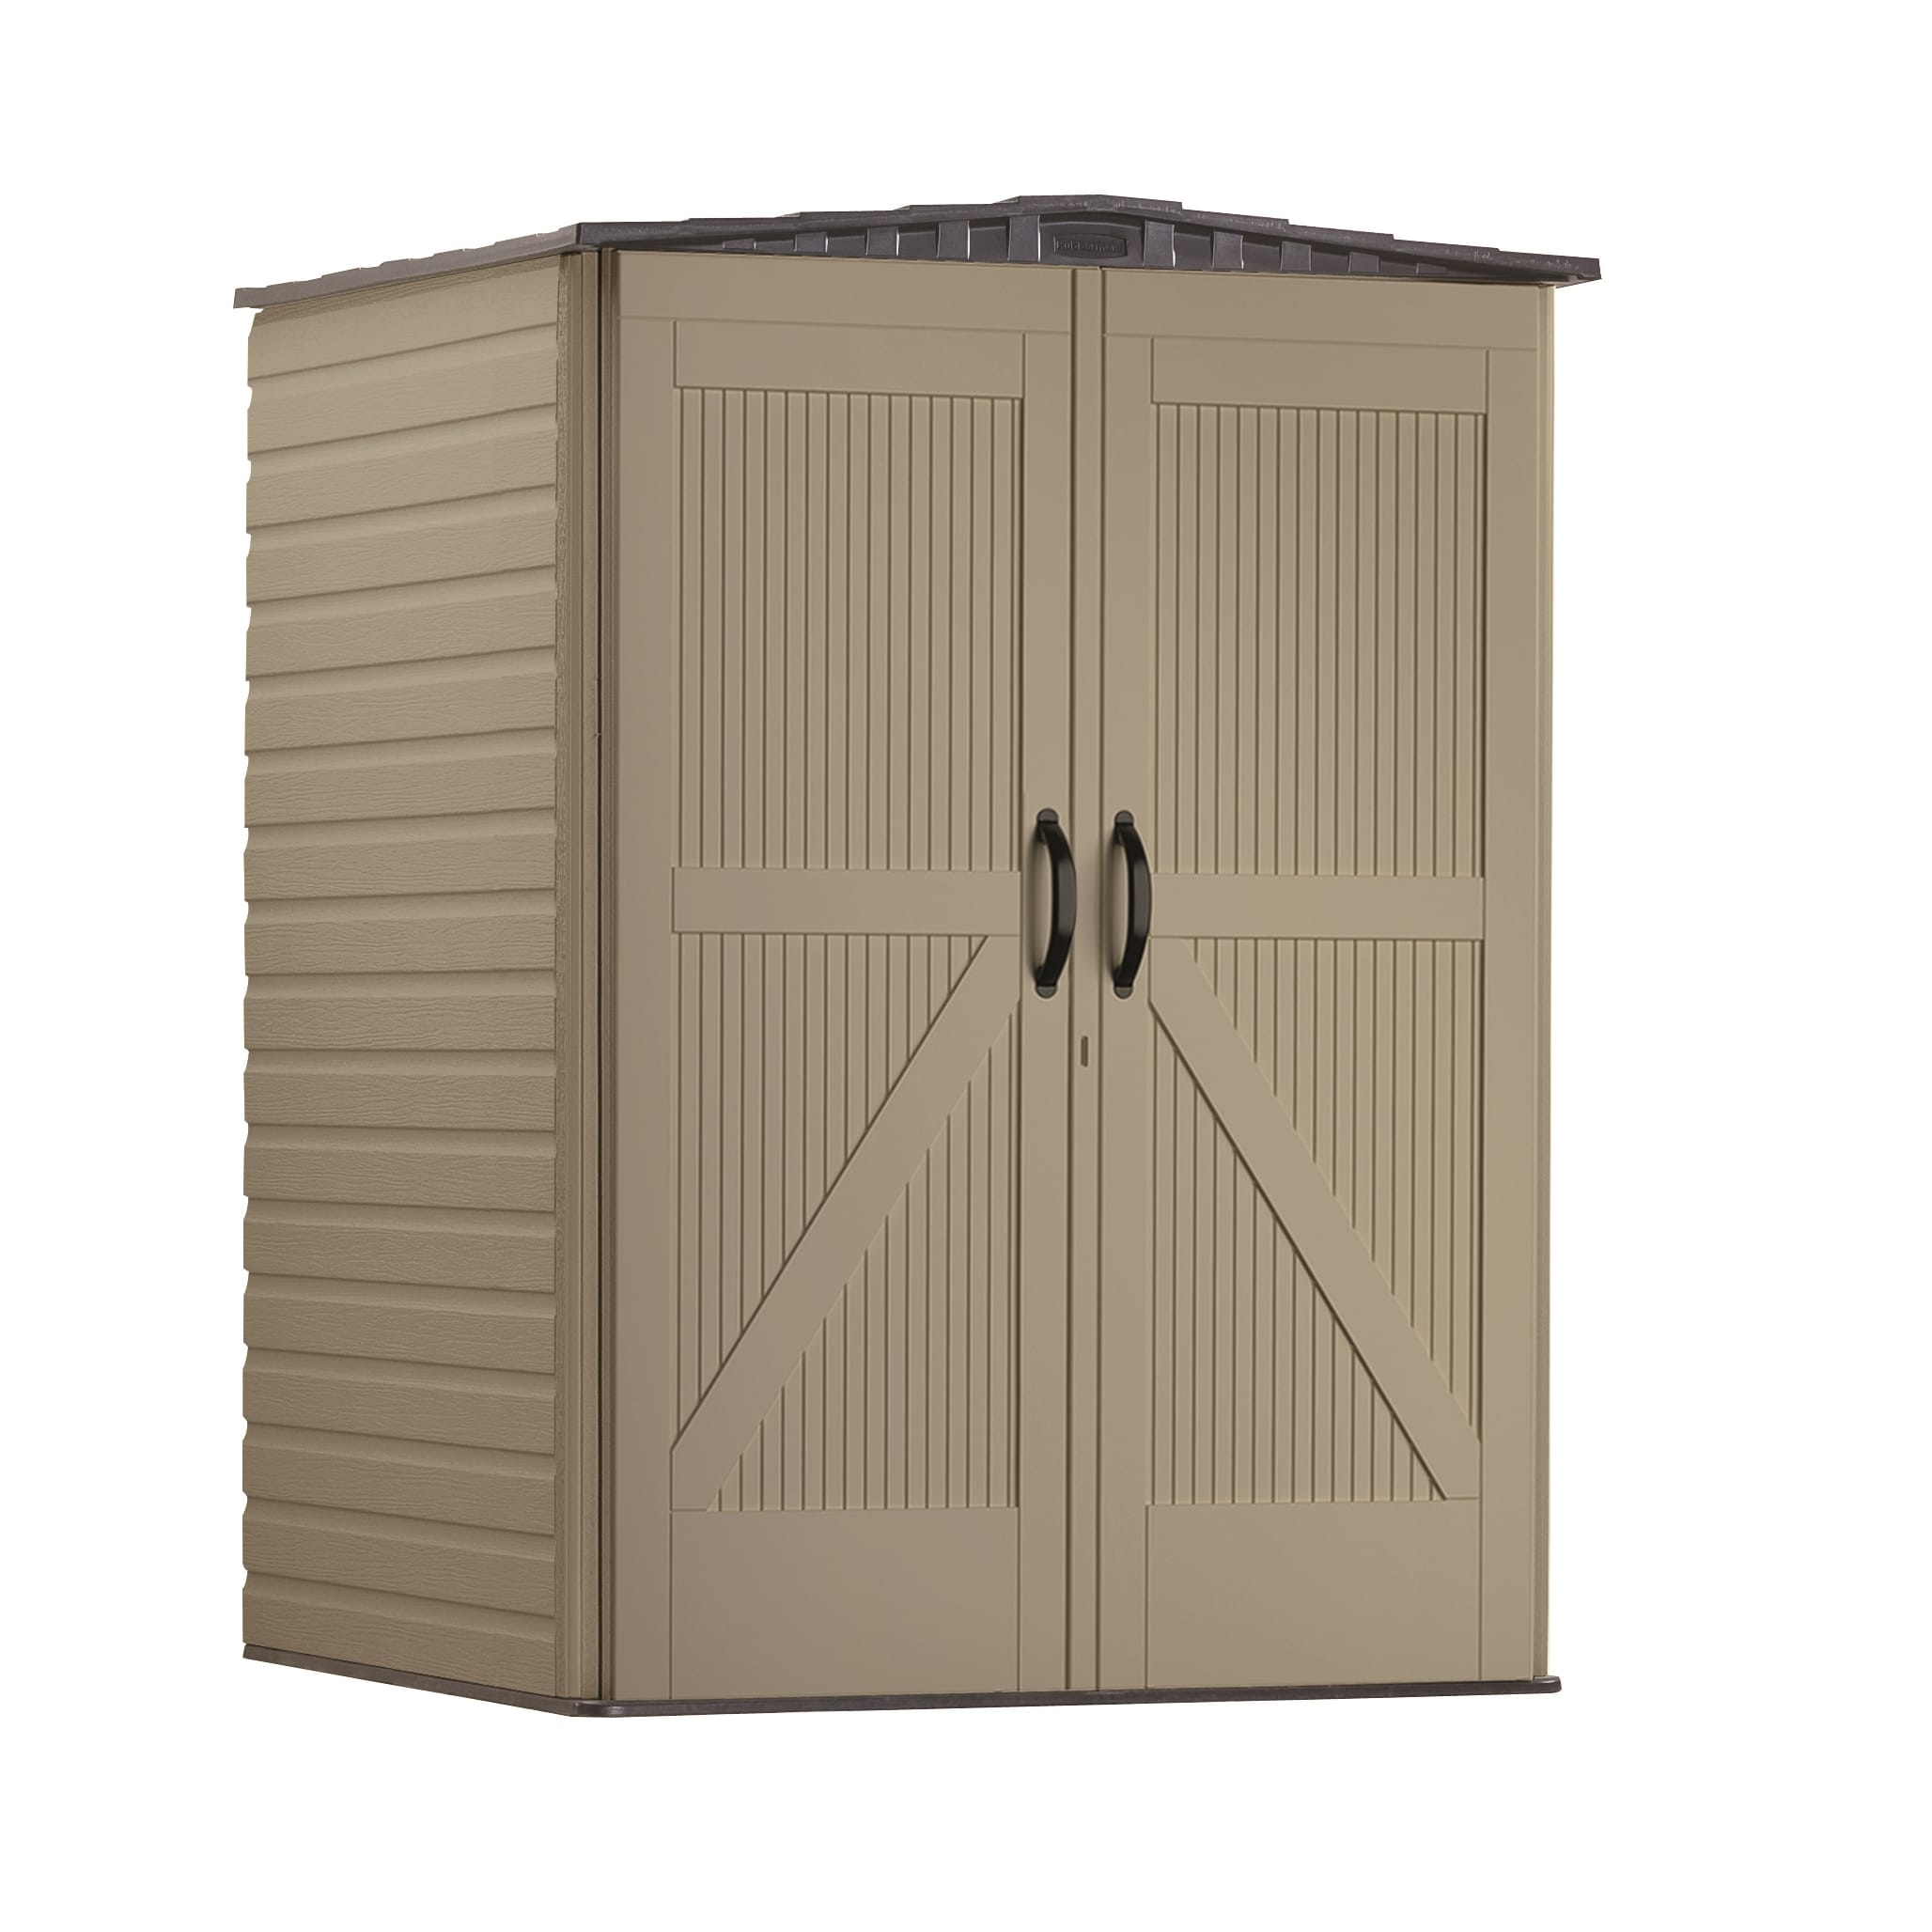 Rubbermaid 5-4 RBM Roughneck Shed in Brown | 1893230